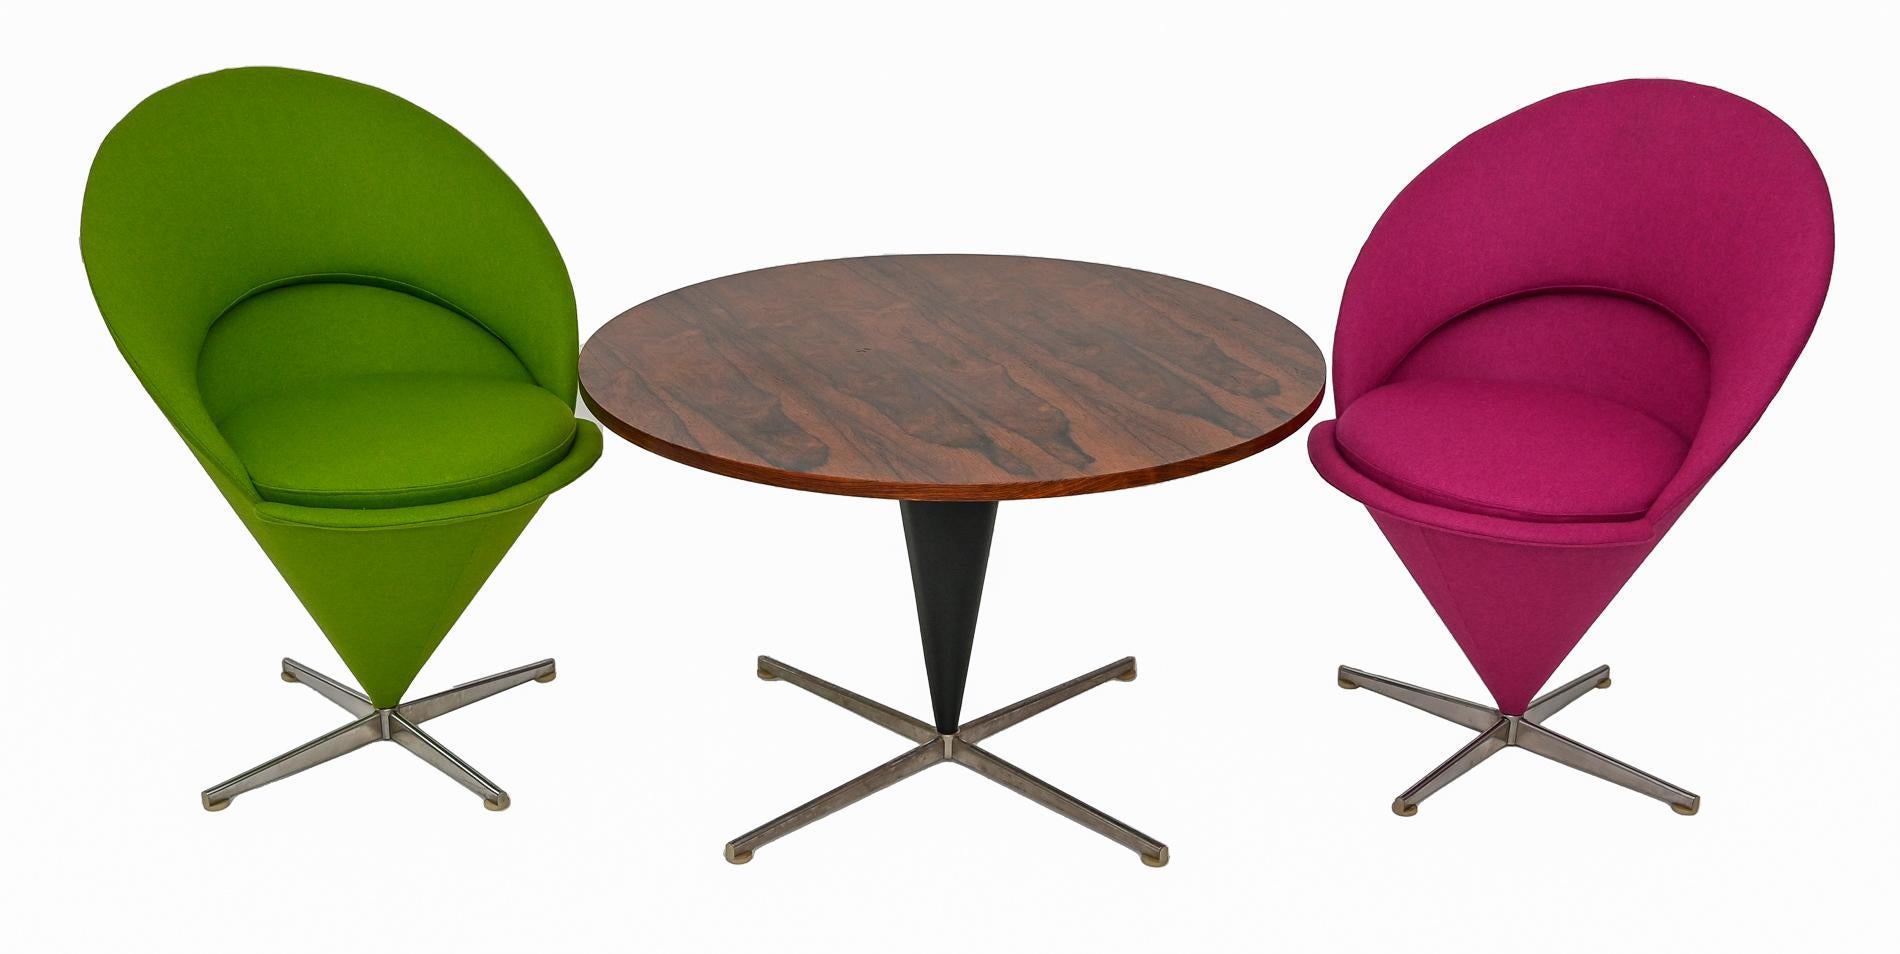 20th Century Verner Panton Seating Group Four Cone Chairs And Table 2